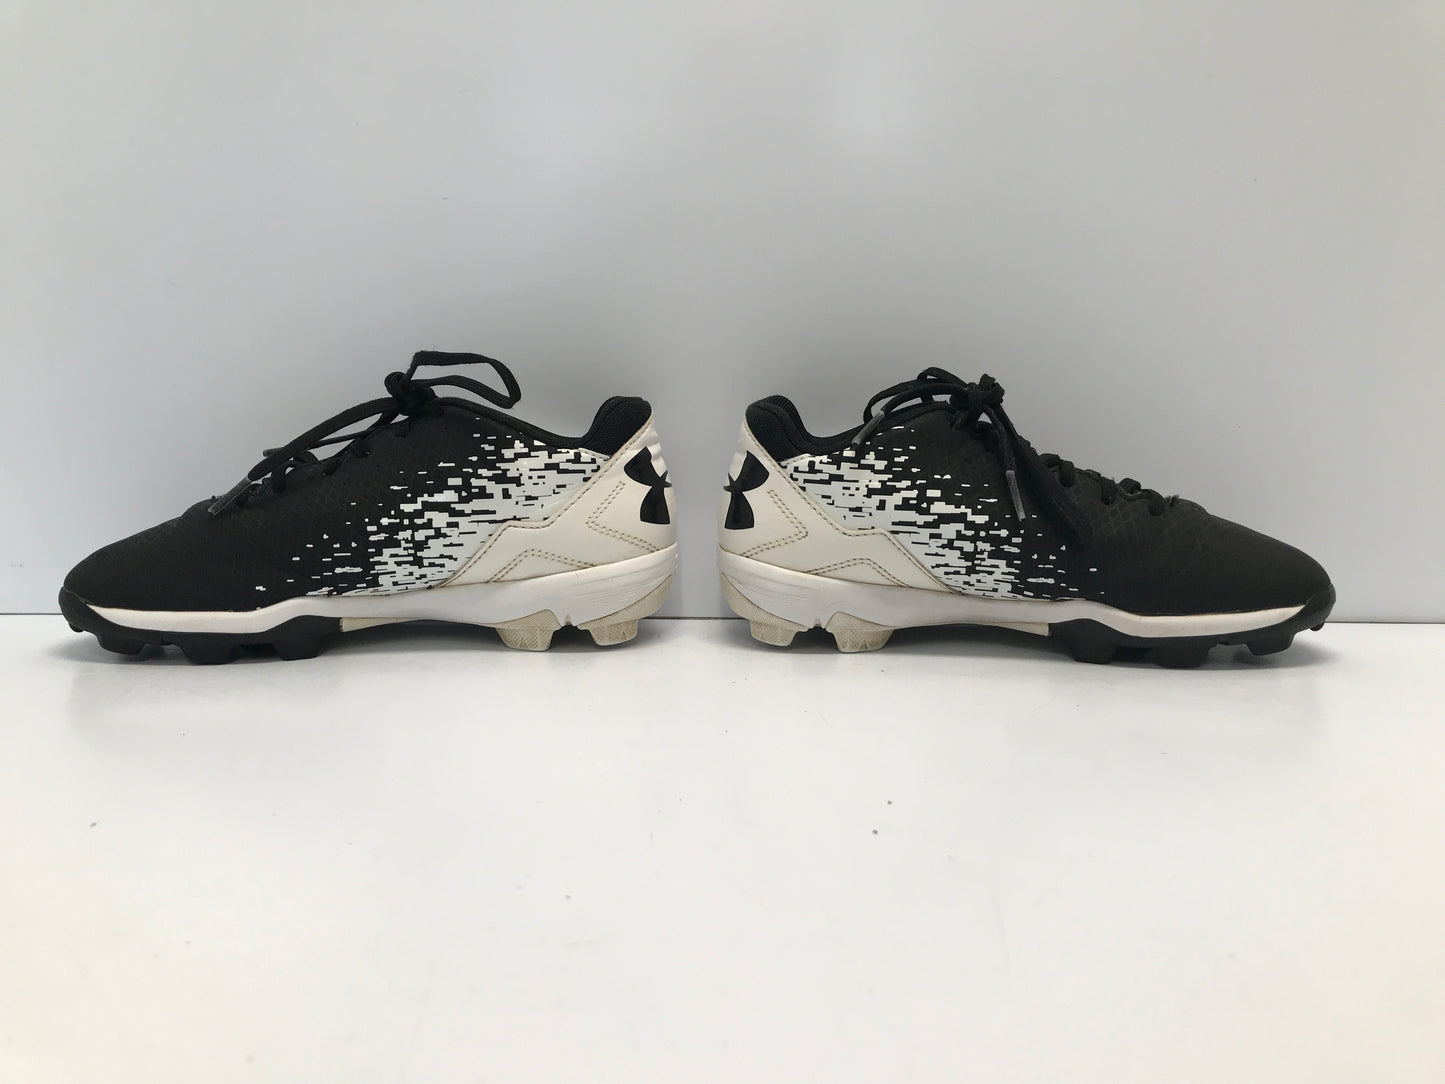 Baseball Shoes Cleats Child Size 3 Under Armour Black White Excellent